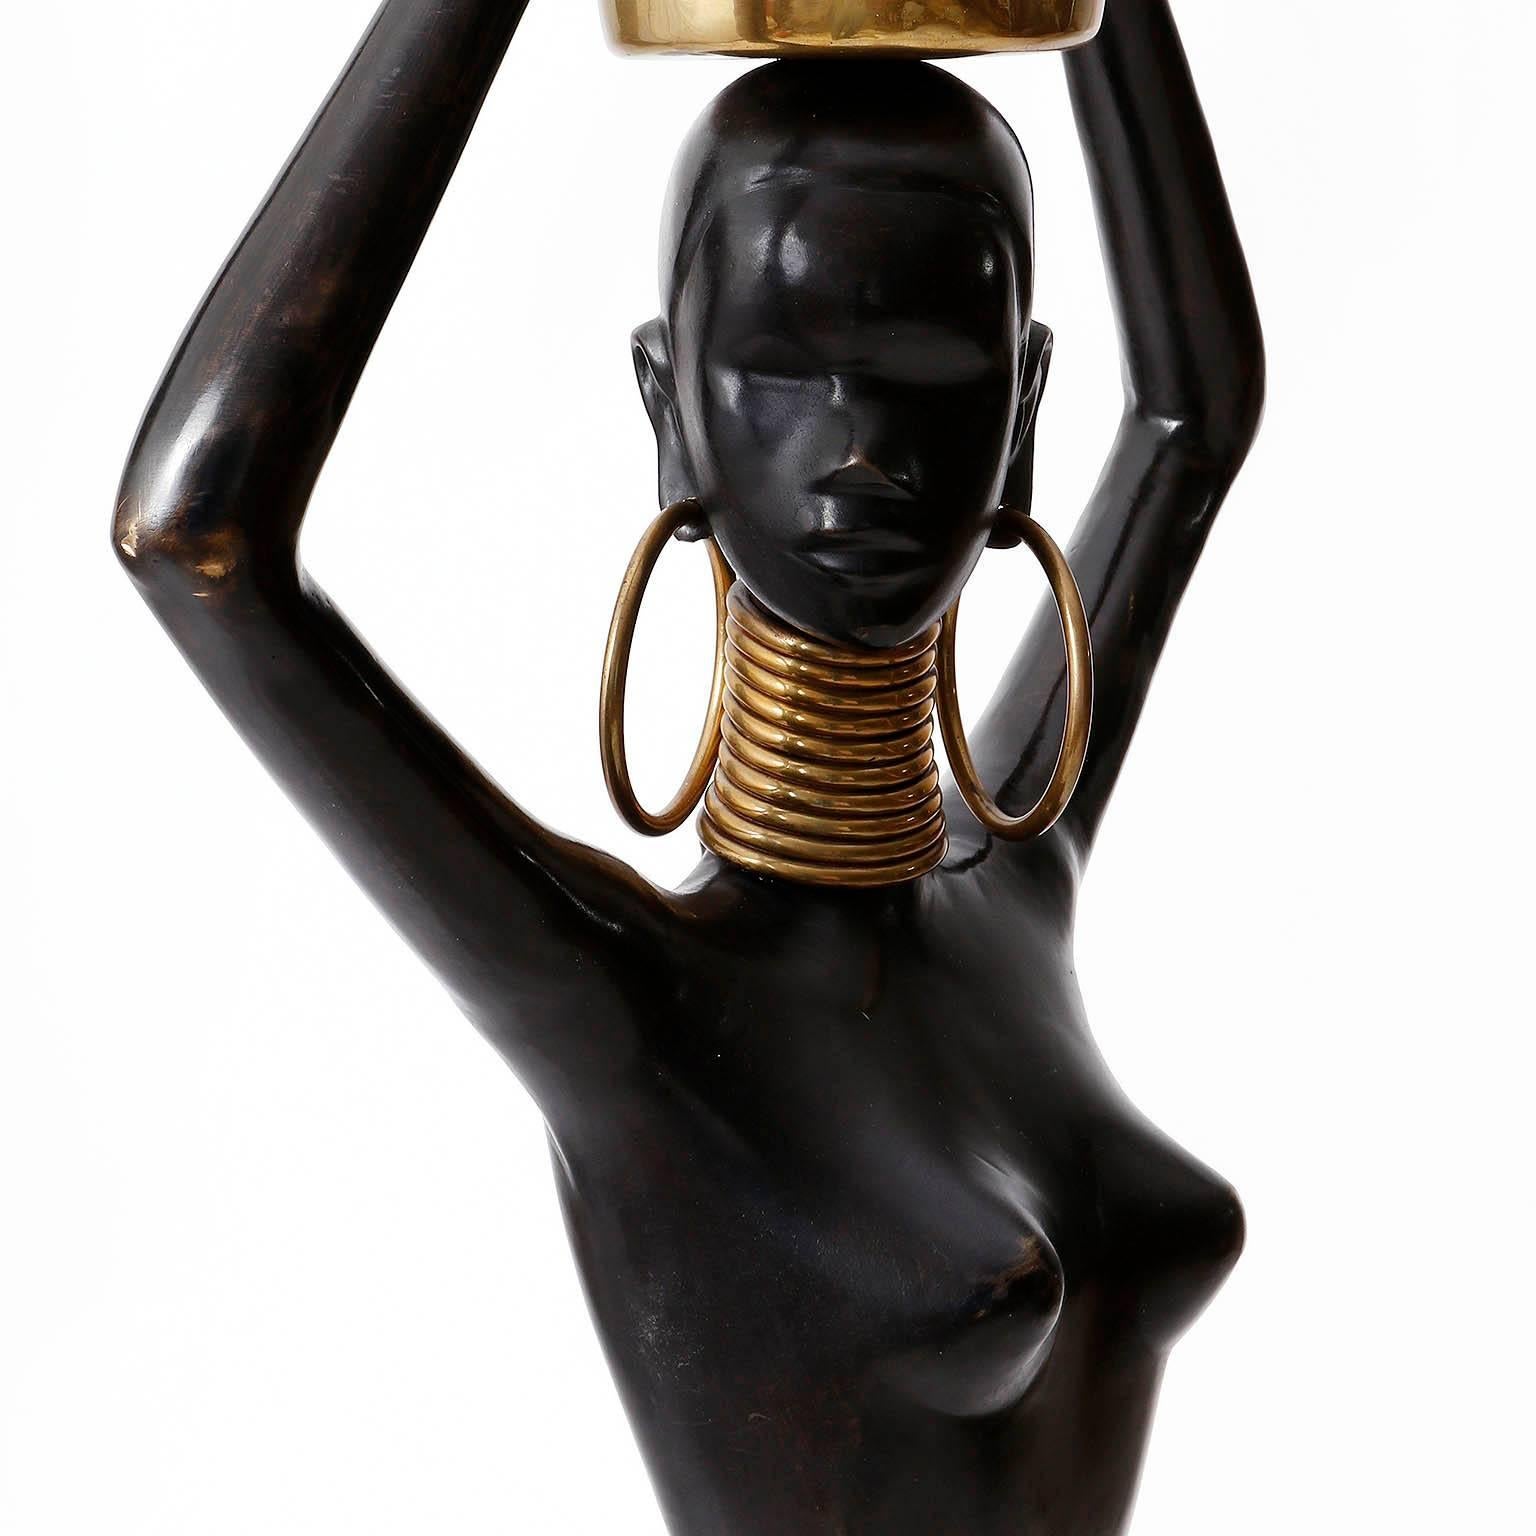 European Human Size African Woman Sculpture Figurine, Polished and Blackened Brass, 1950